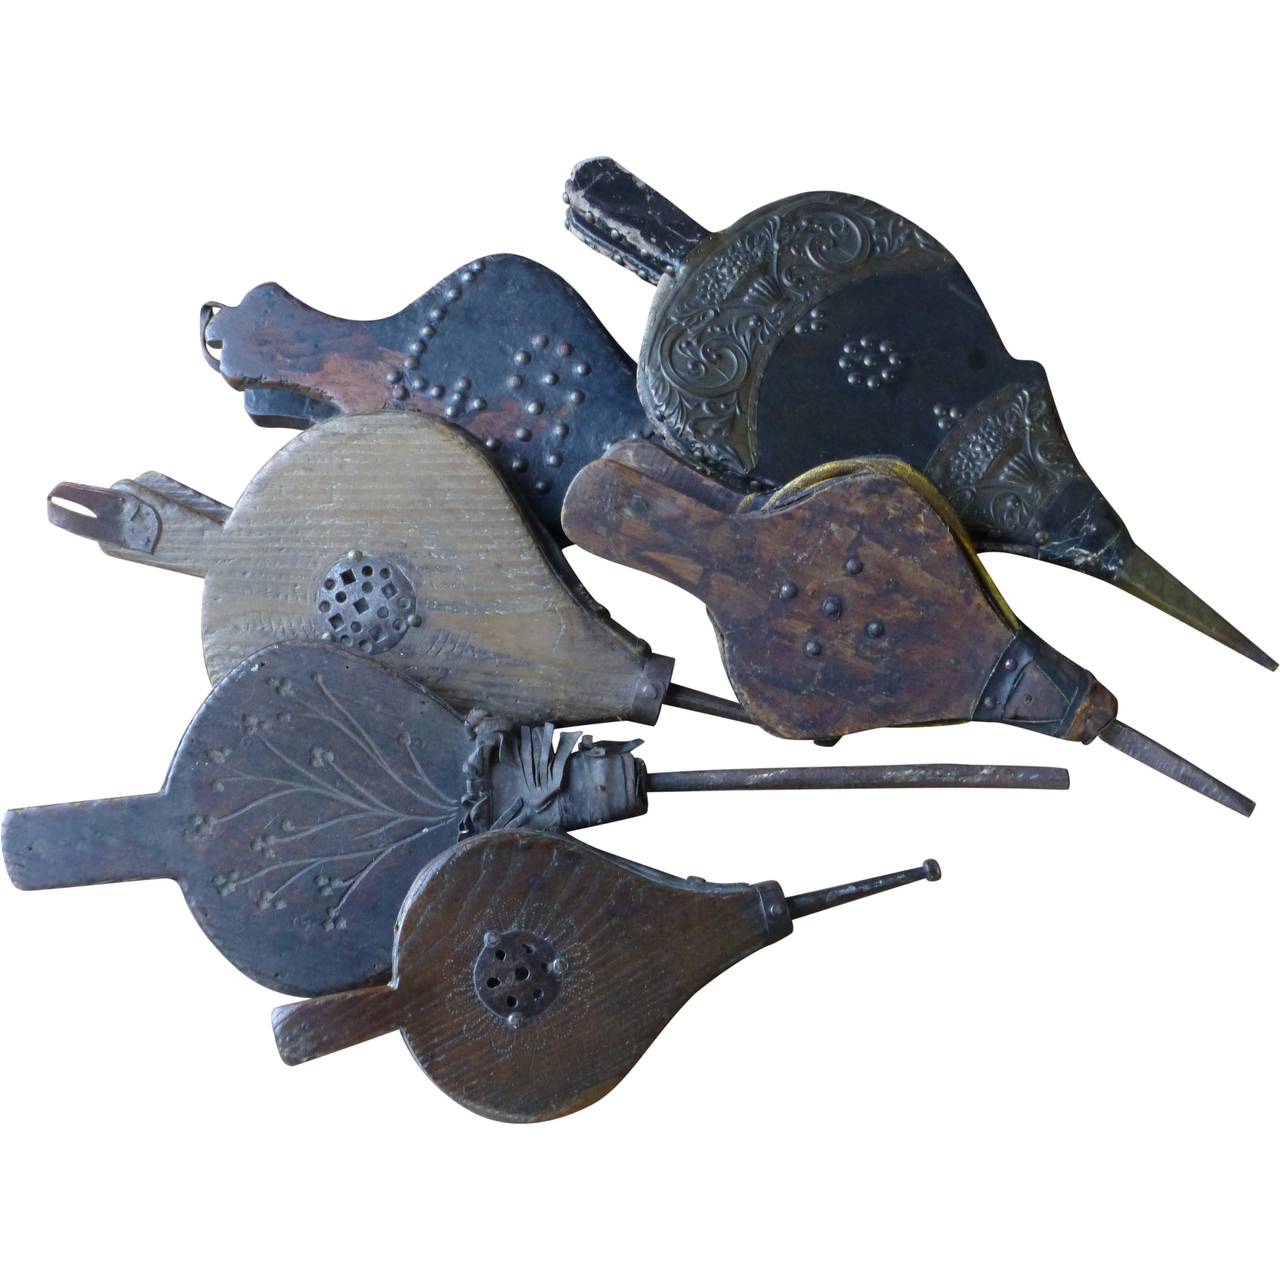 Rare wrought iron blow pipes and antique bellows. 

You can see all our current blow pokes for sale at 1stdibs by pressing the ‘View All From Seller’ button at the bottom of the page and then type 'blow'.

We have a unique and specialized collection